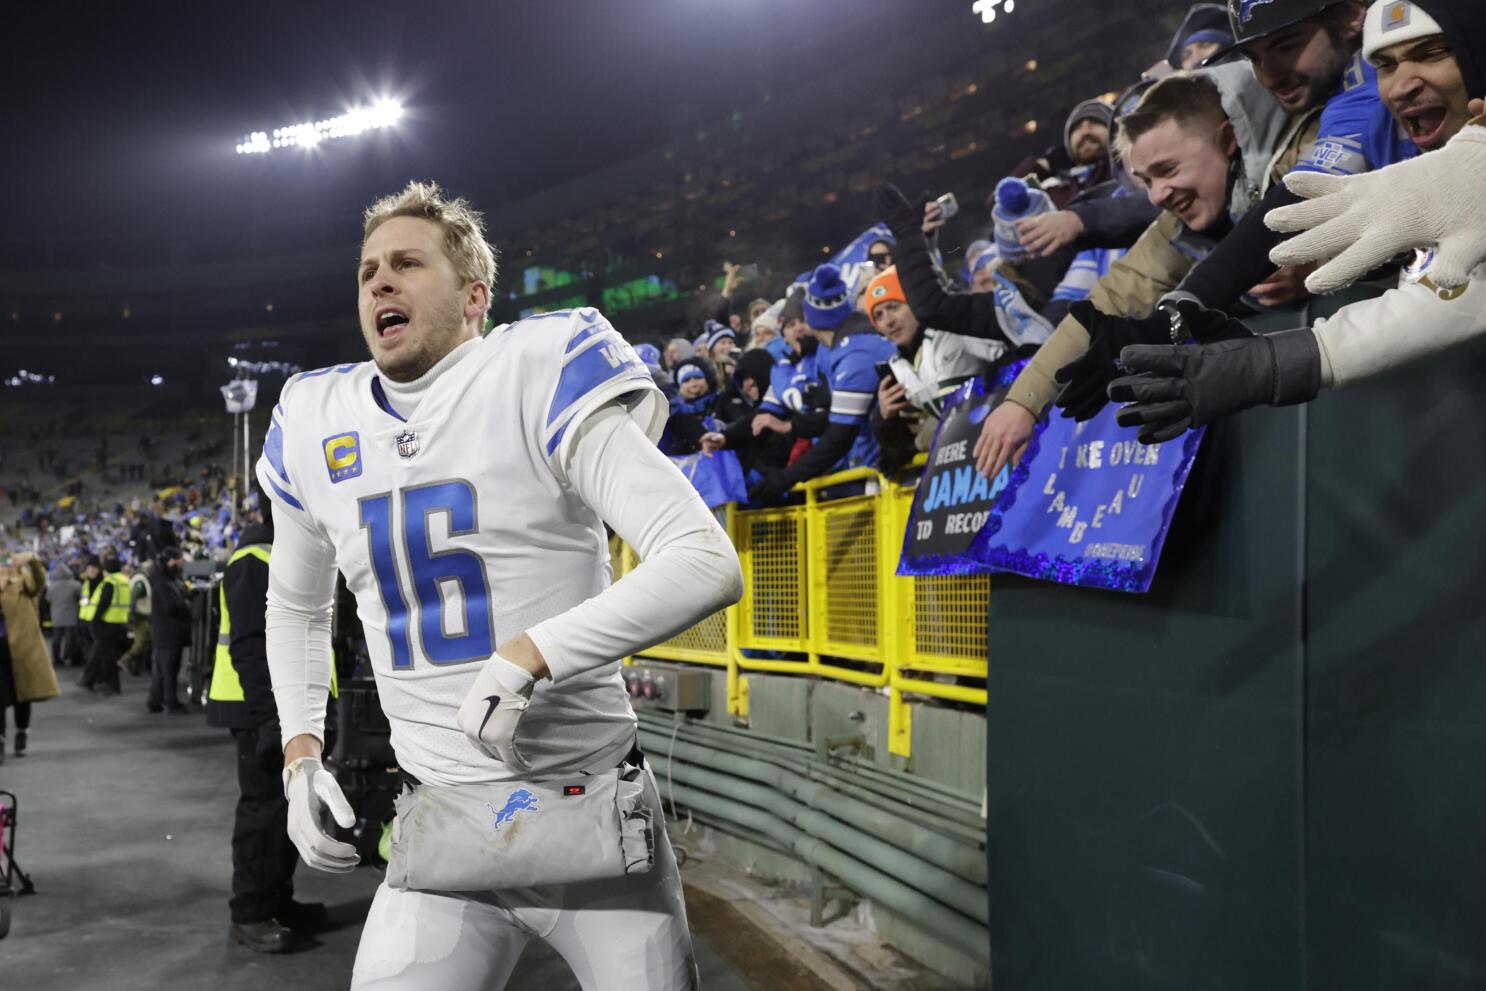 Lions miss playoffs, but head into offseason with optimism